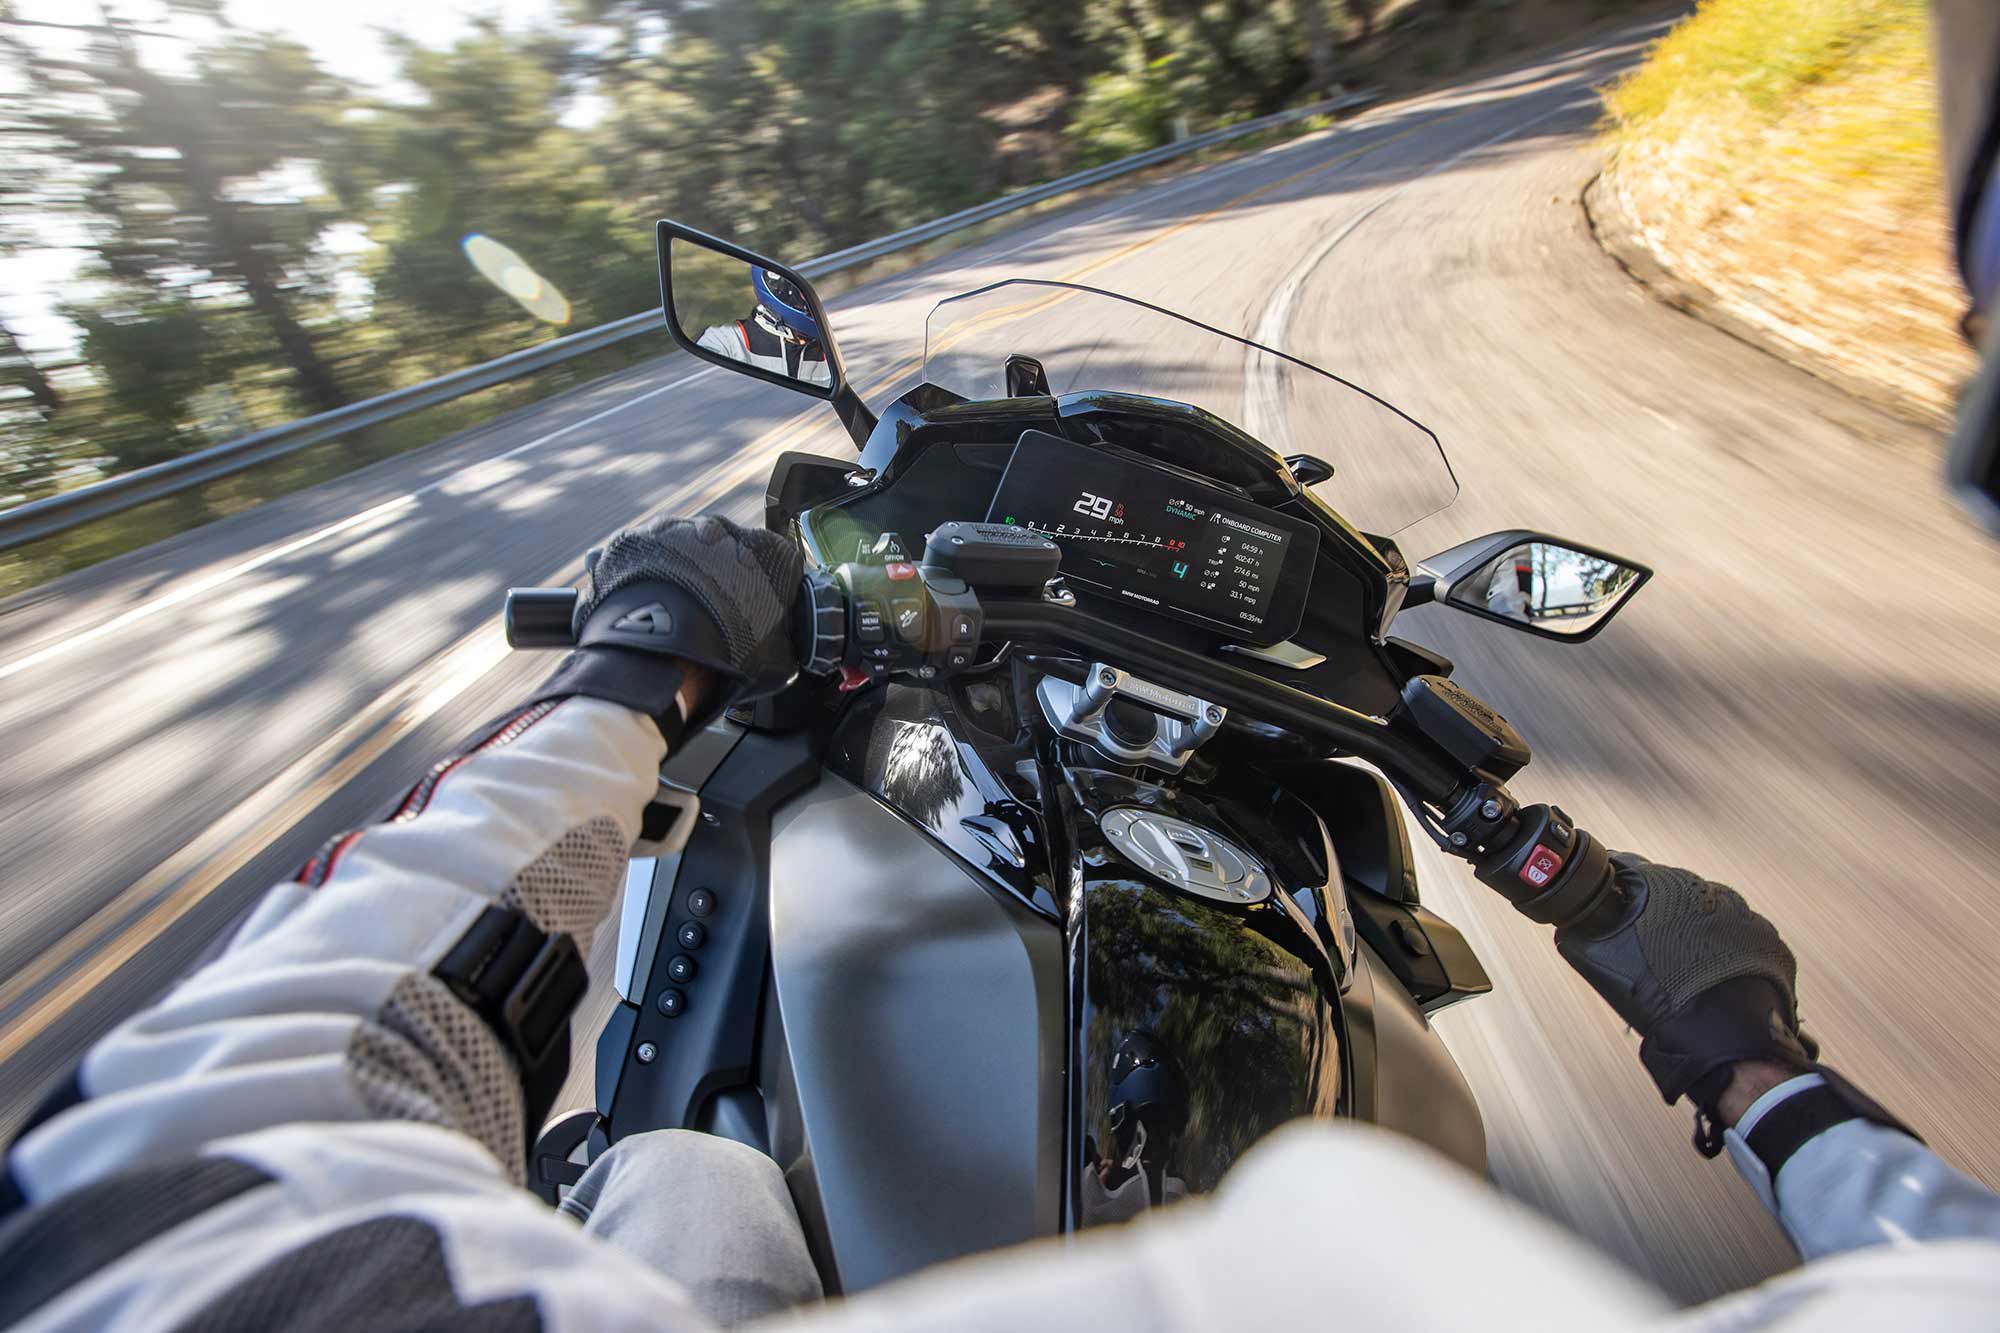 If you’re into logging miles, the K 1600 B’s cockpit is the place to be. It’s quiet, cozy, and loaded with creature comforts.